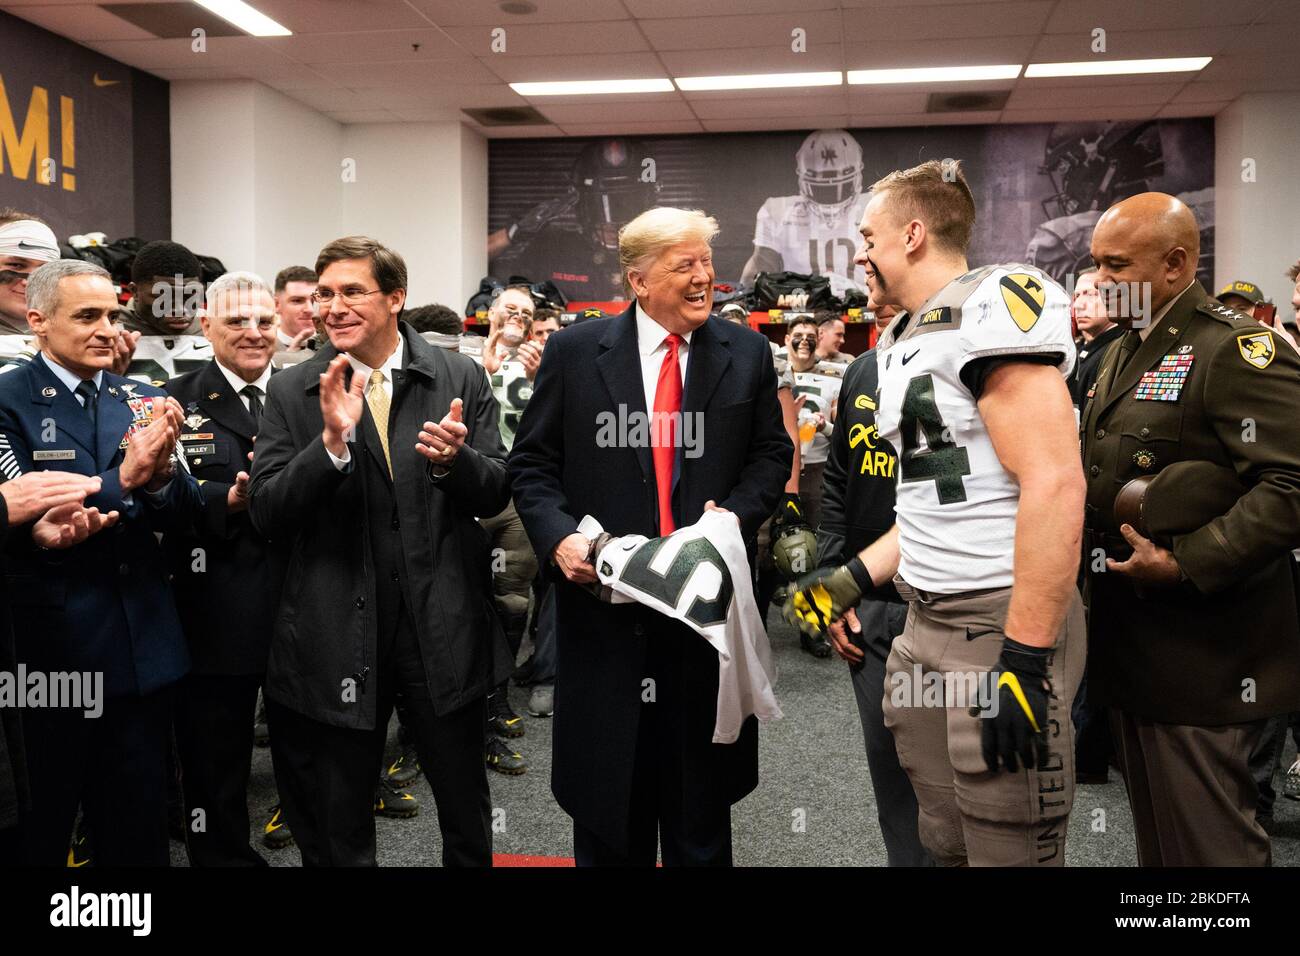 President Donald J. Trump, joined by Secretary of Defense Mark Esper, meets with members of the U.S. Army football team in their locker room prior to the start of the 120th Army-Navy football game at Lincoln Financial Field in Philadelphia, Pa. President Trump at the Army-Navy Football Game Stock Photo